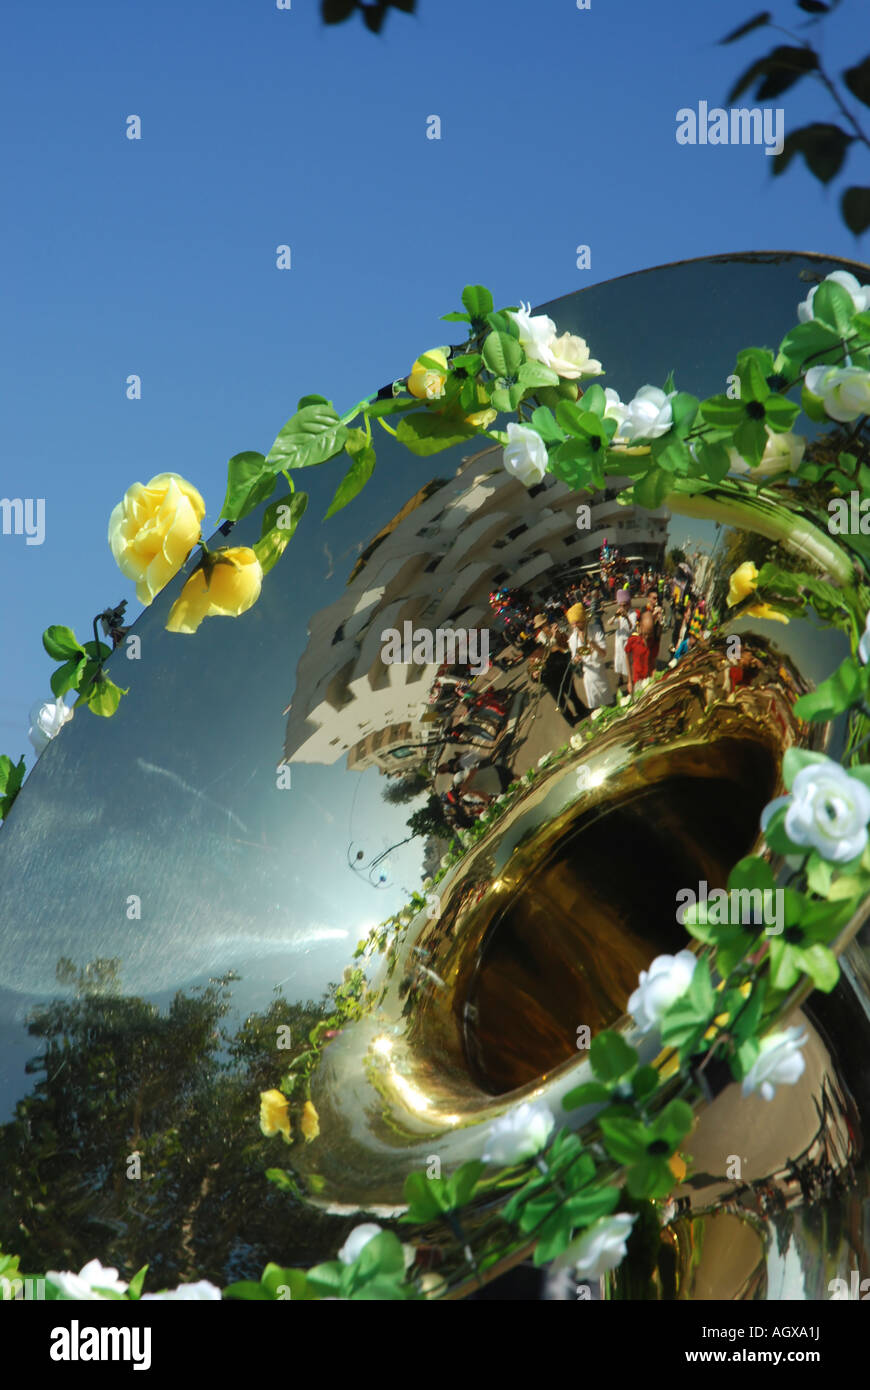 A tuba decorated with plastic flowers with a reflection of the marching band Stock Photo